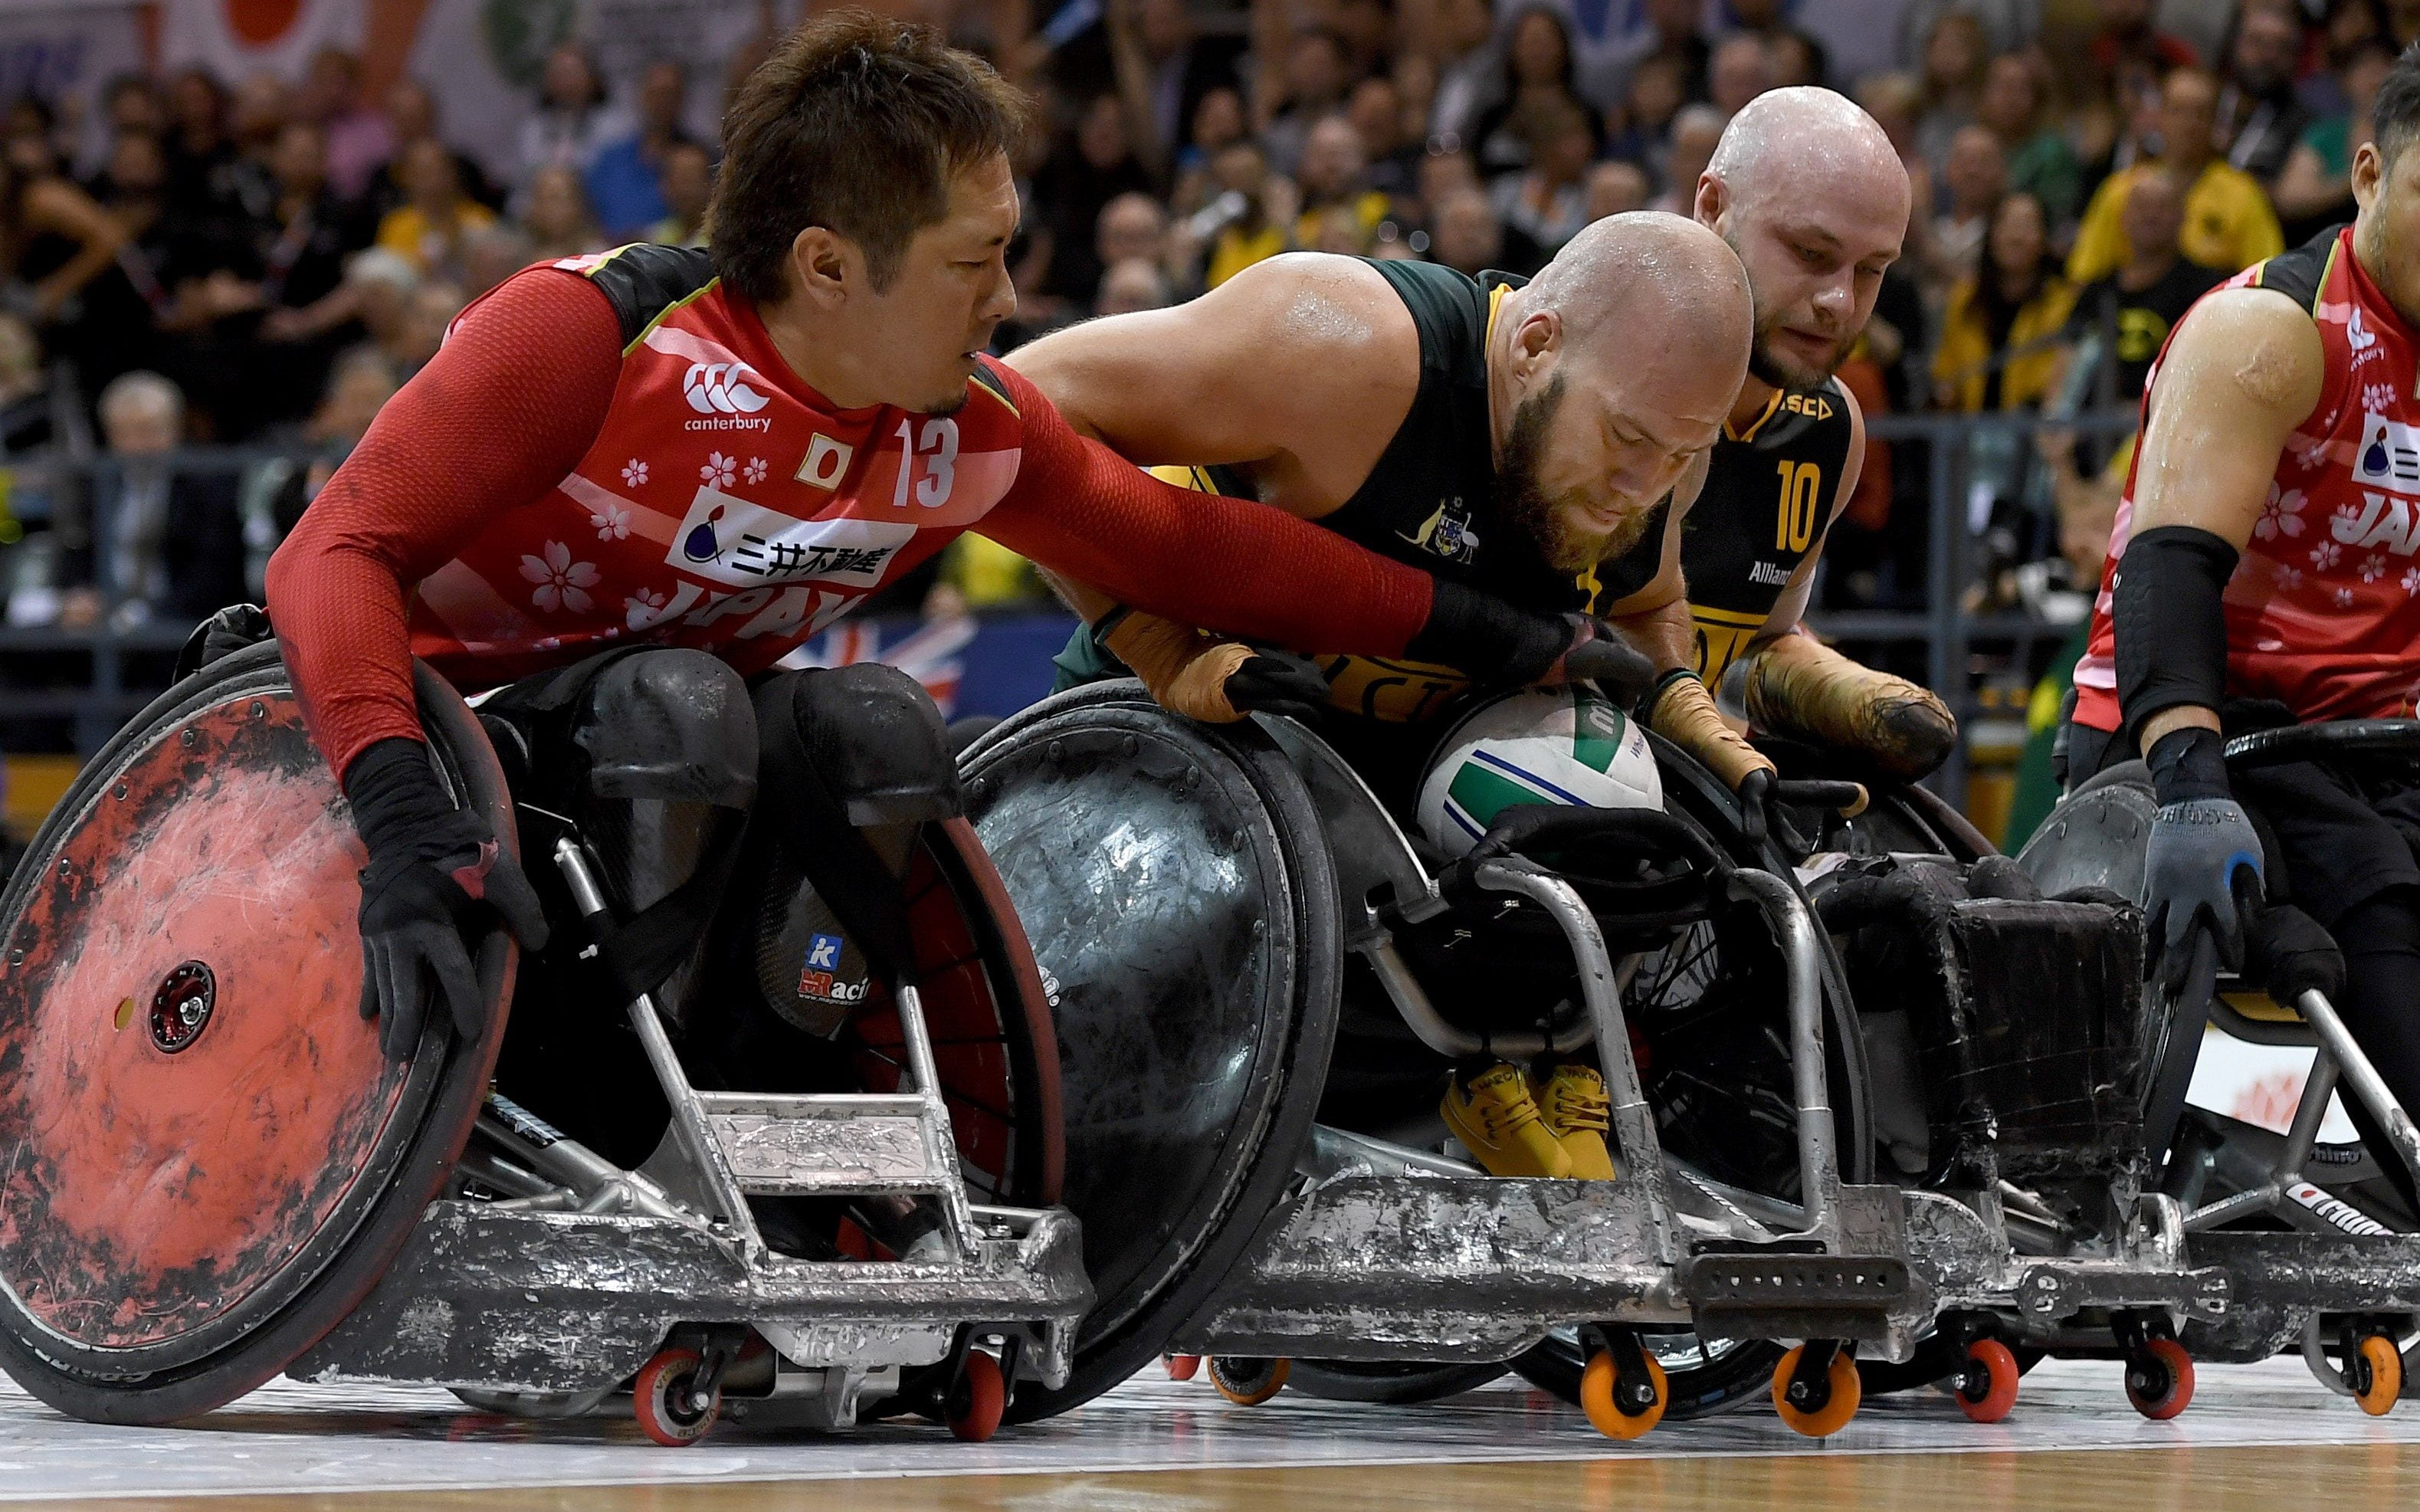 Australia claim silver at Wheelchair Rugby World Championship after losing to Japan